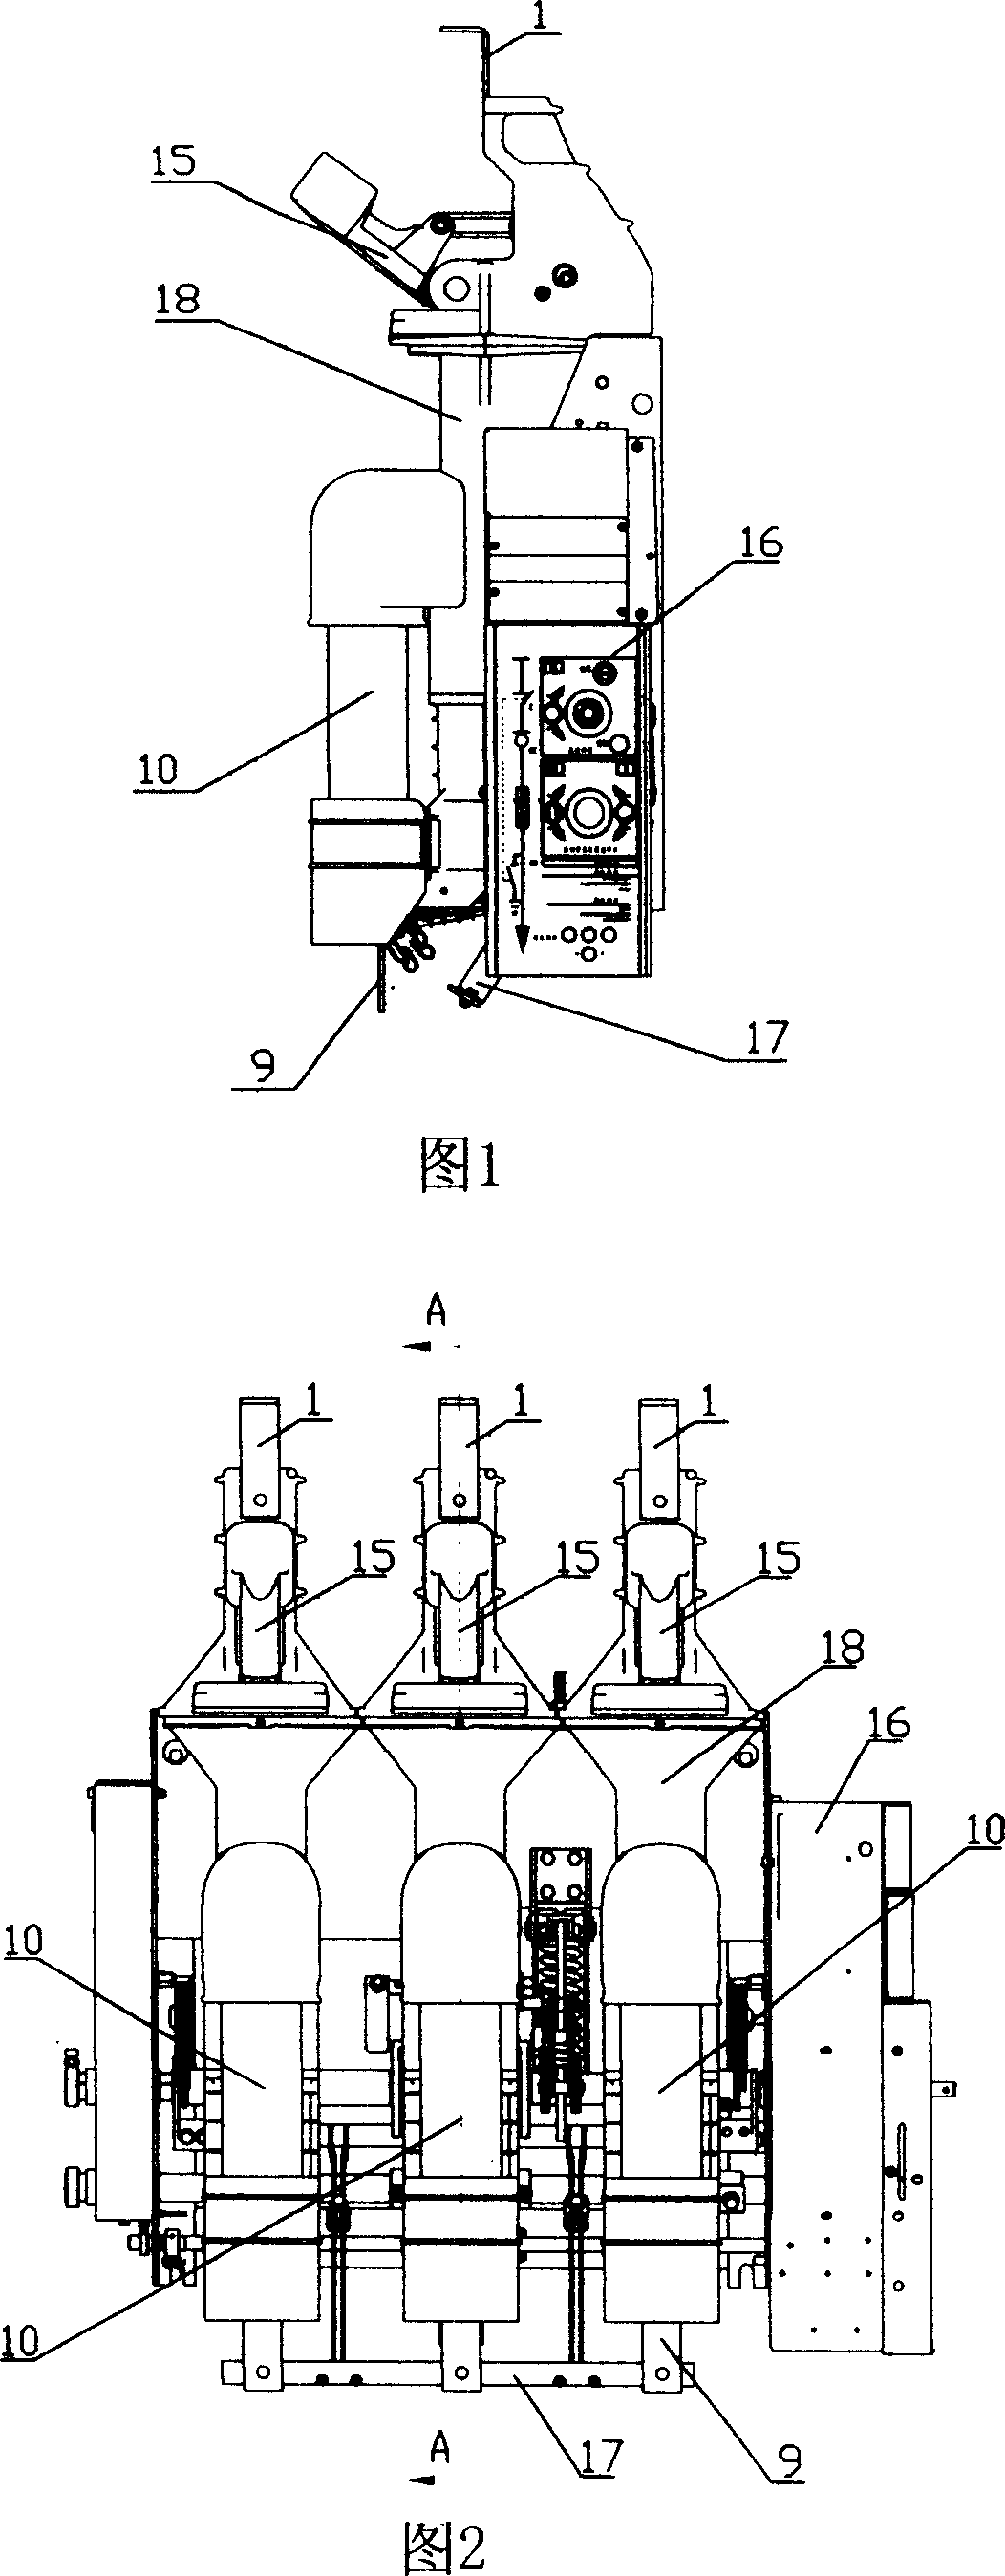 Vacuum load switch and combined electrical equipment